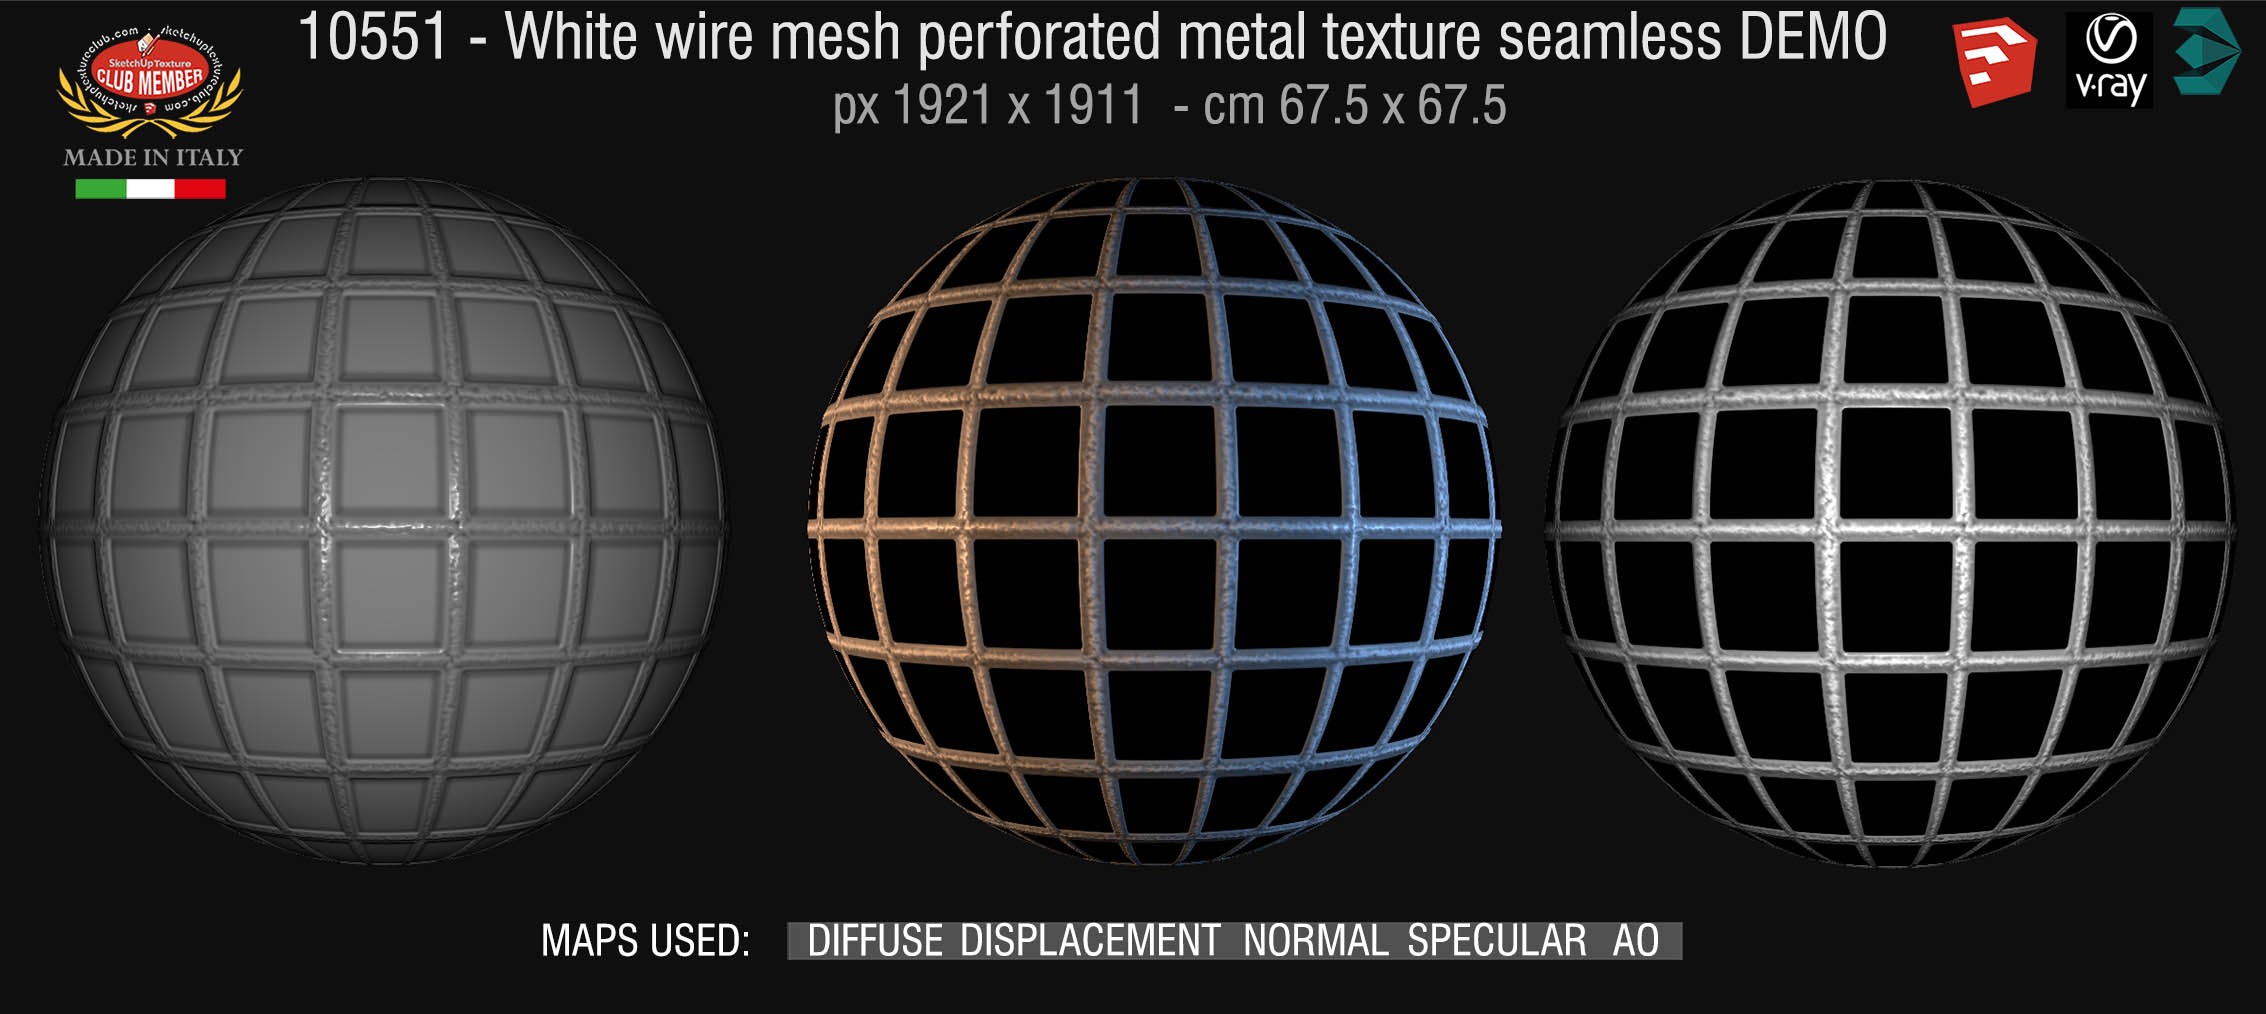 10551 HR White wiew mesh perforate metal texture seamless + maps DEMO